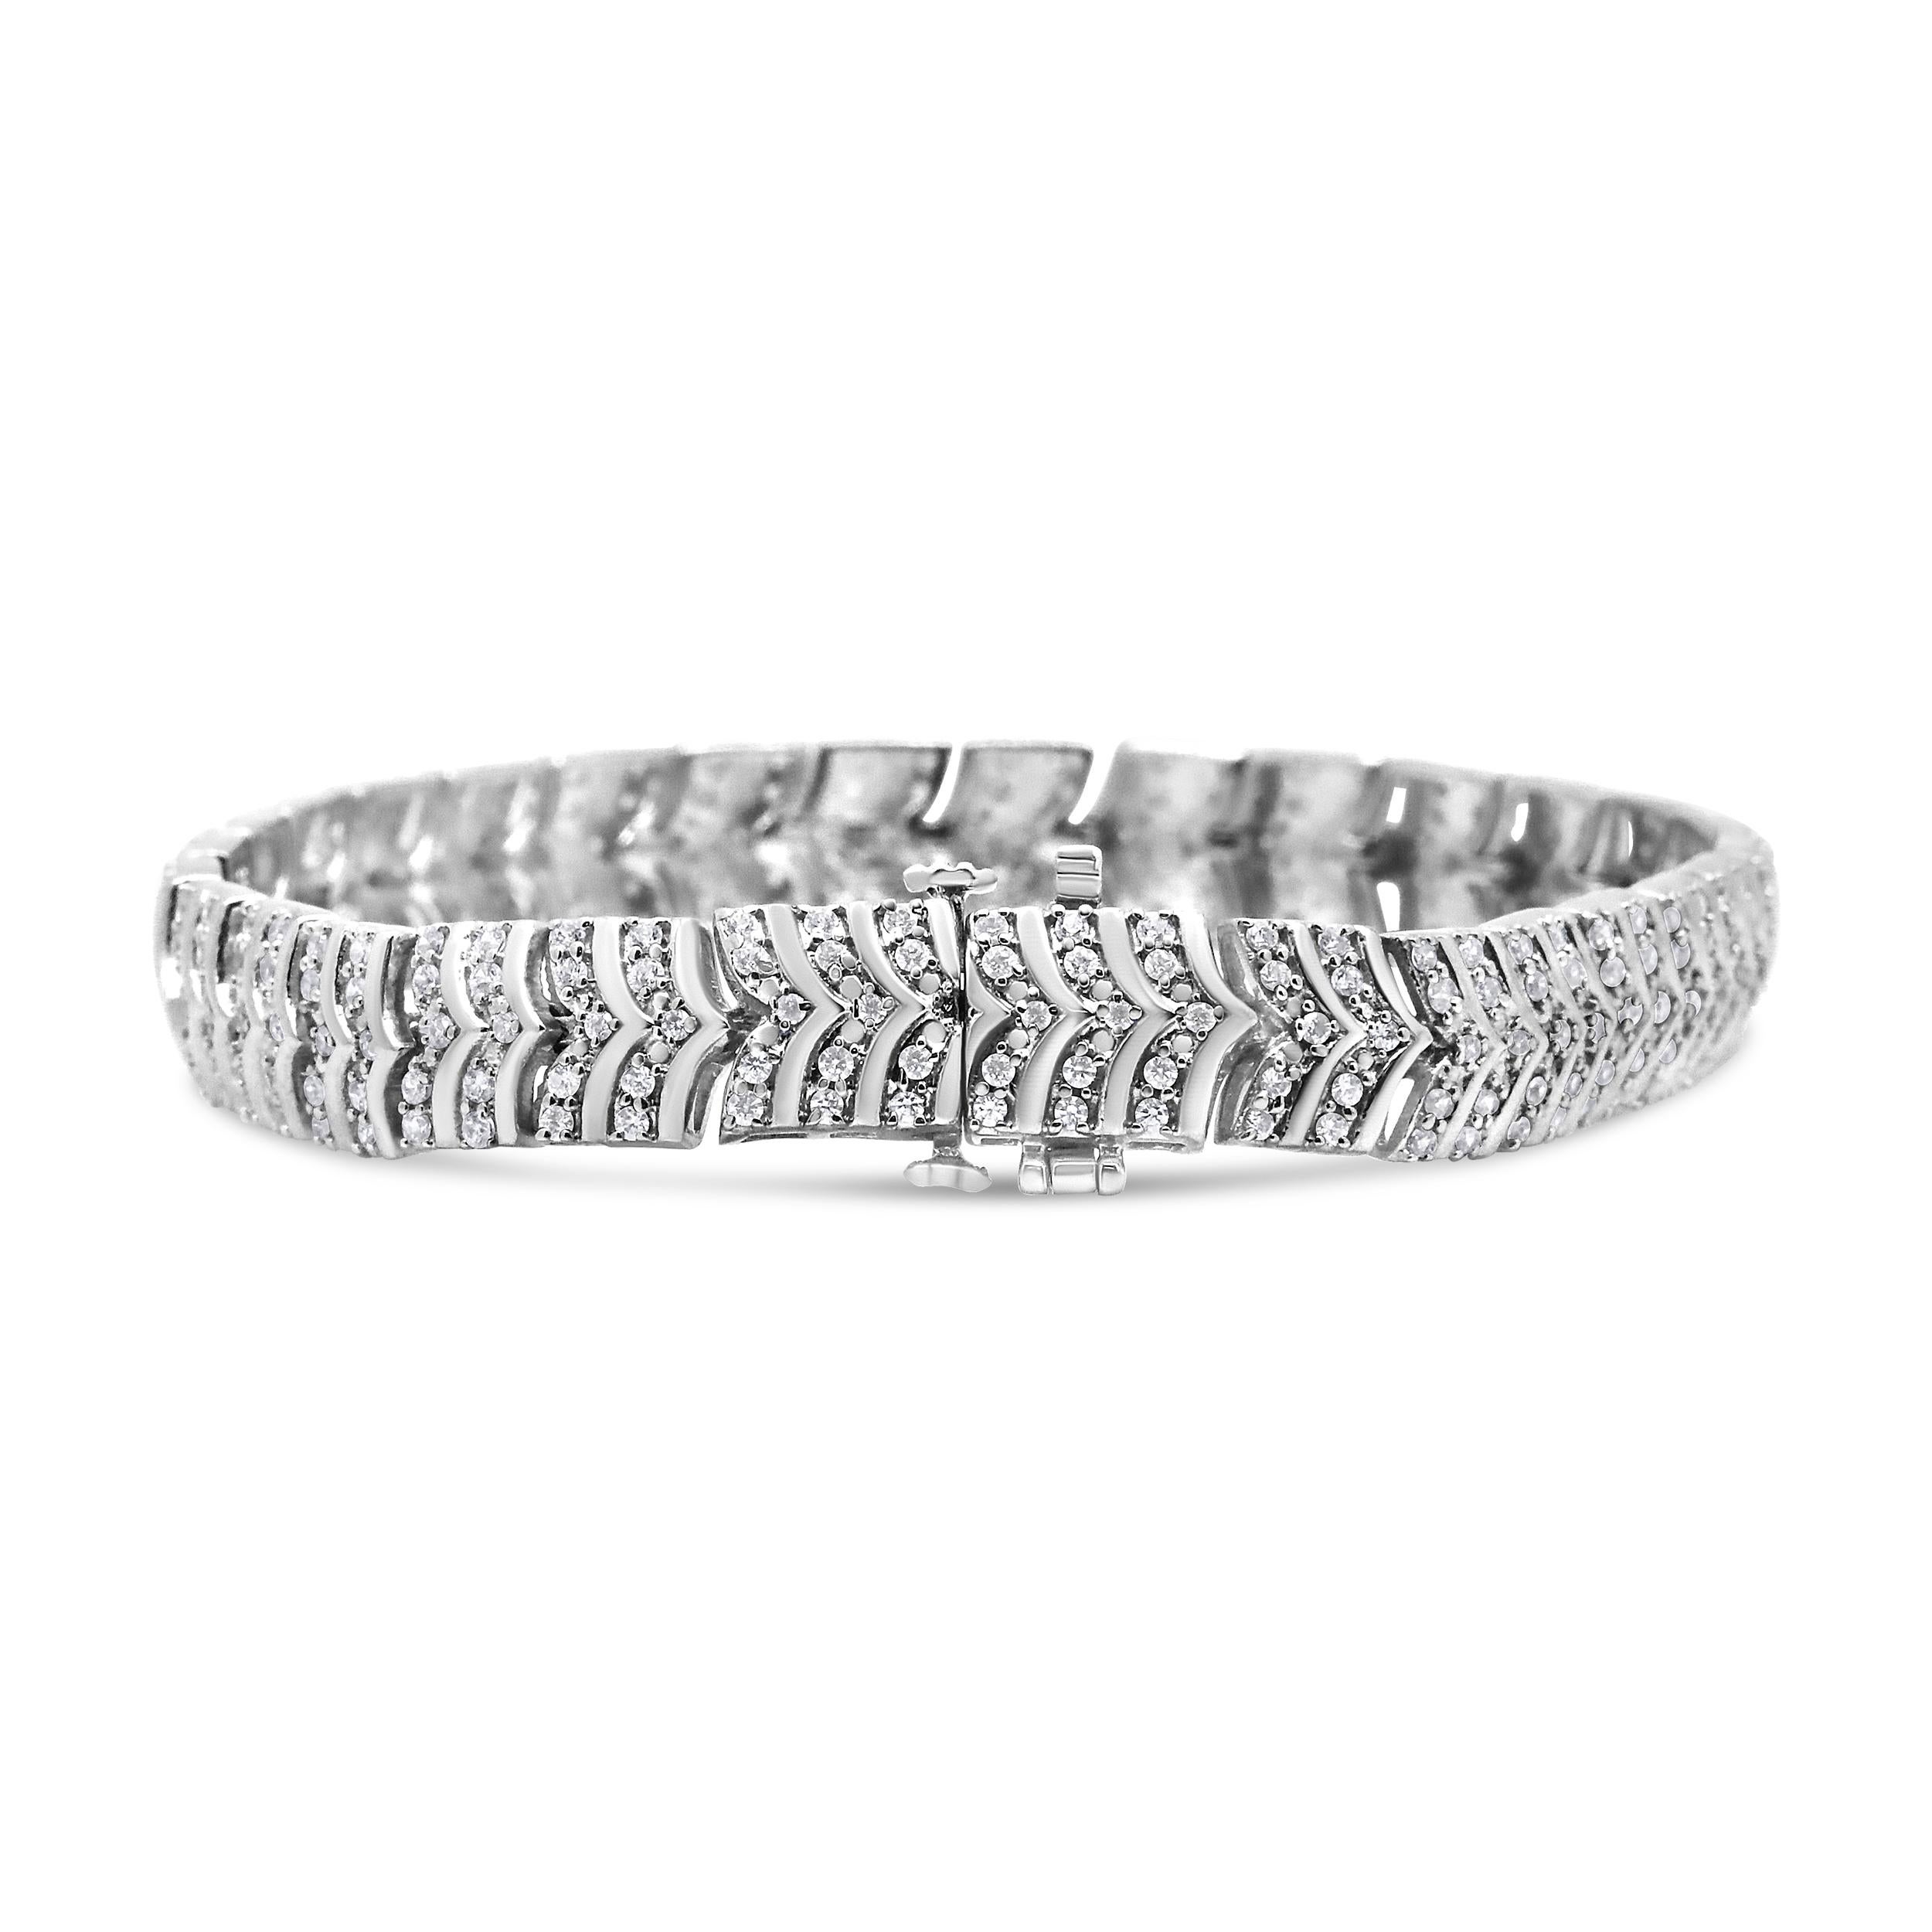 Featuring chevron links crafted of fine .925 sterling silver, this diamond bracelet exudes a timeless modernity that makes it do delectably delicious to wear. Rows of round, pave-set diamonds are featured between each link in a contoured path. The